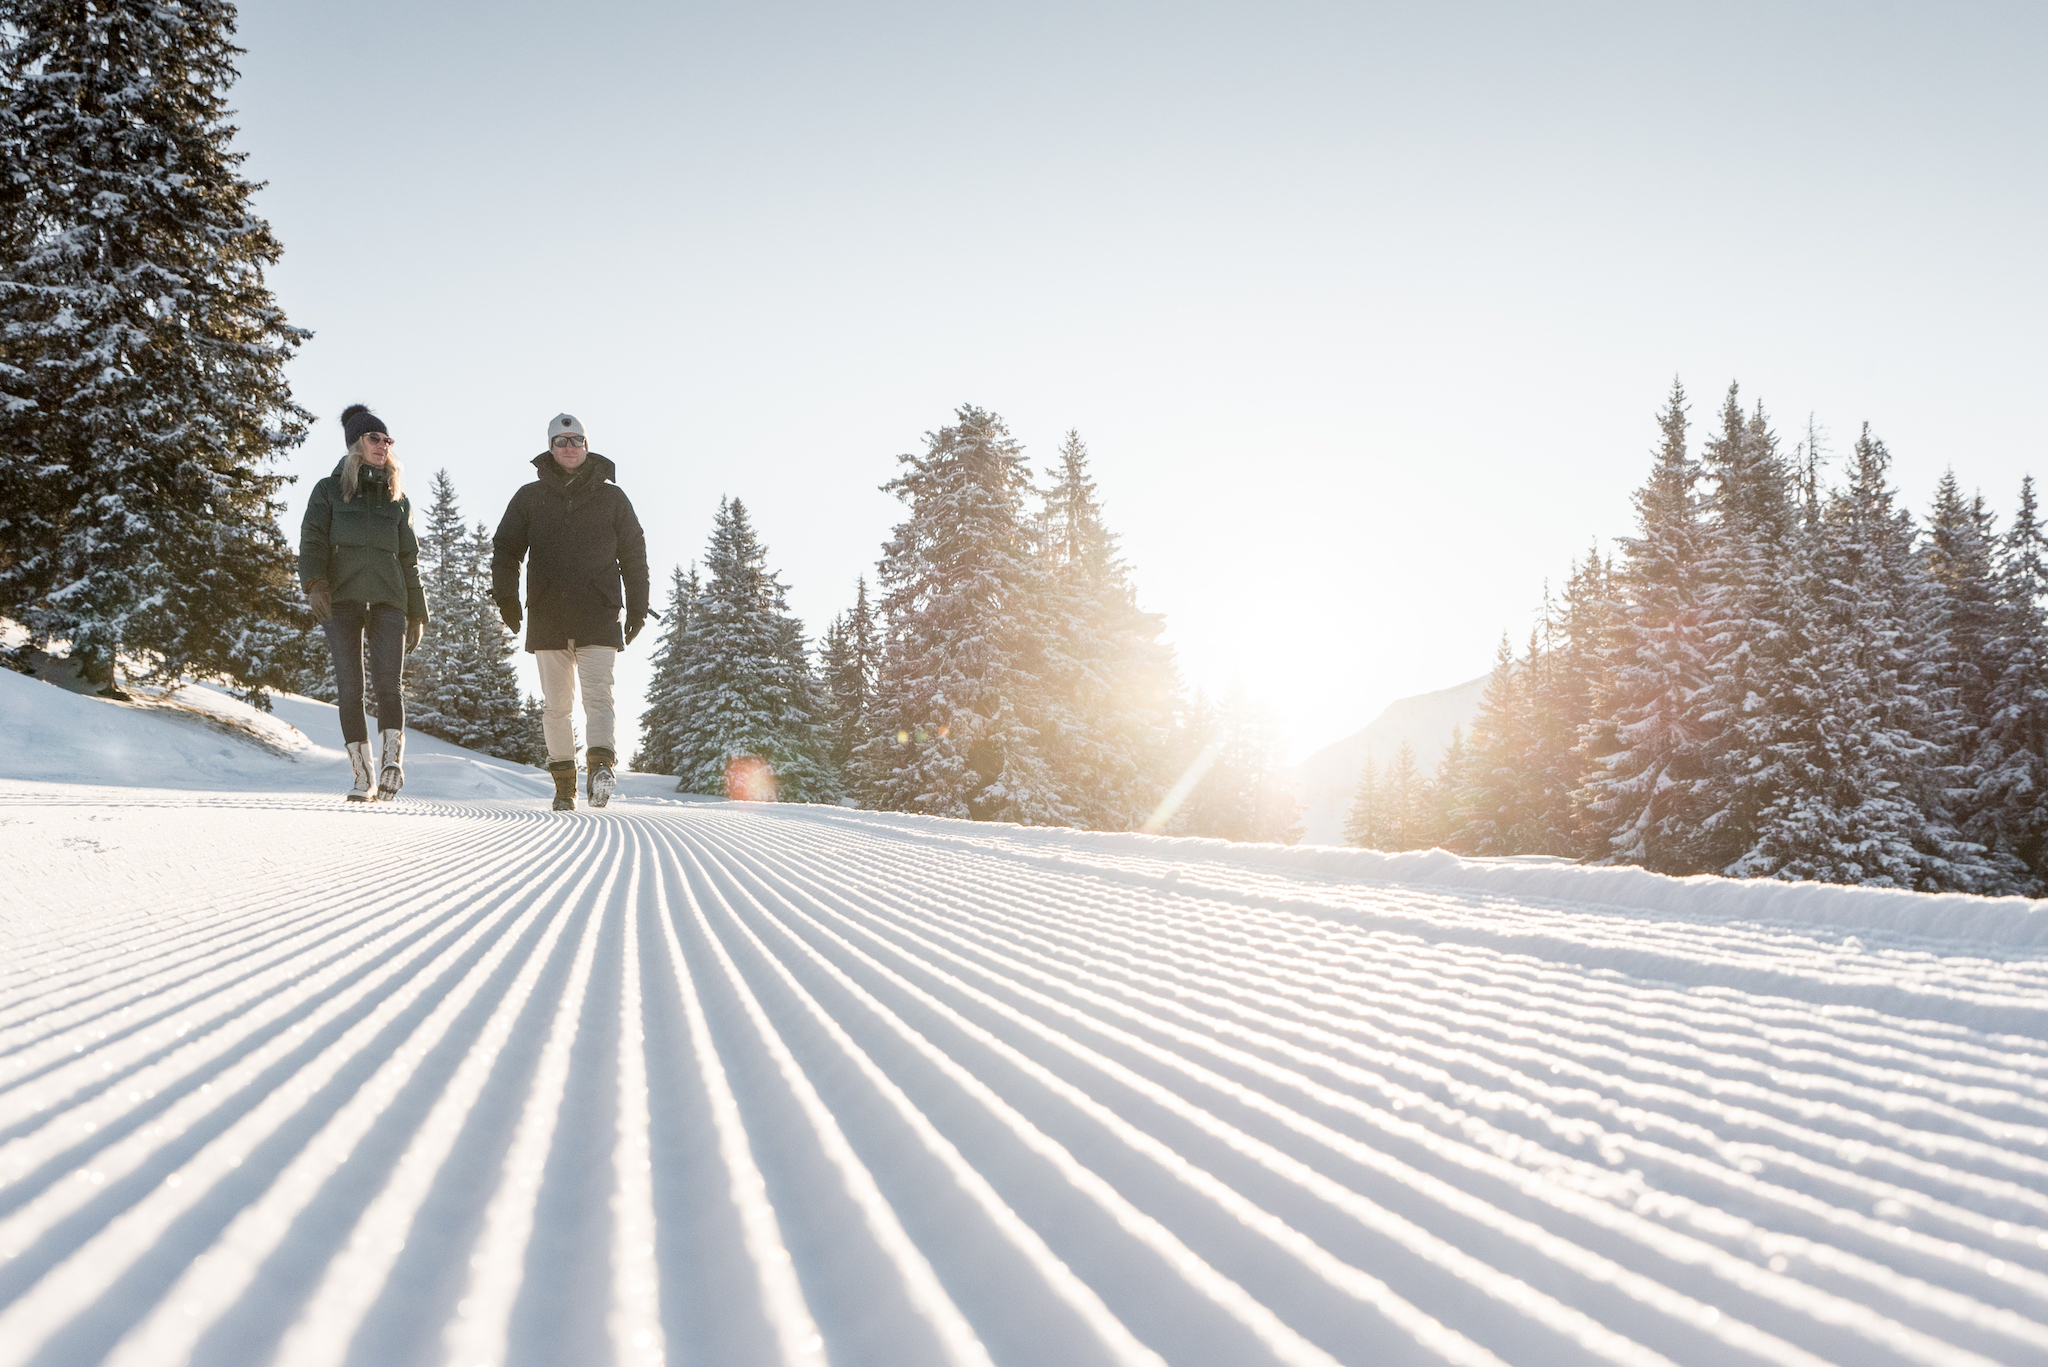 Switzerland Winter Guide: The Most Magical Things to Do This Season